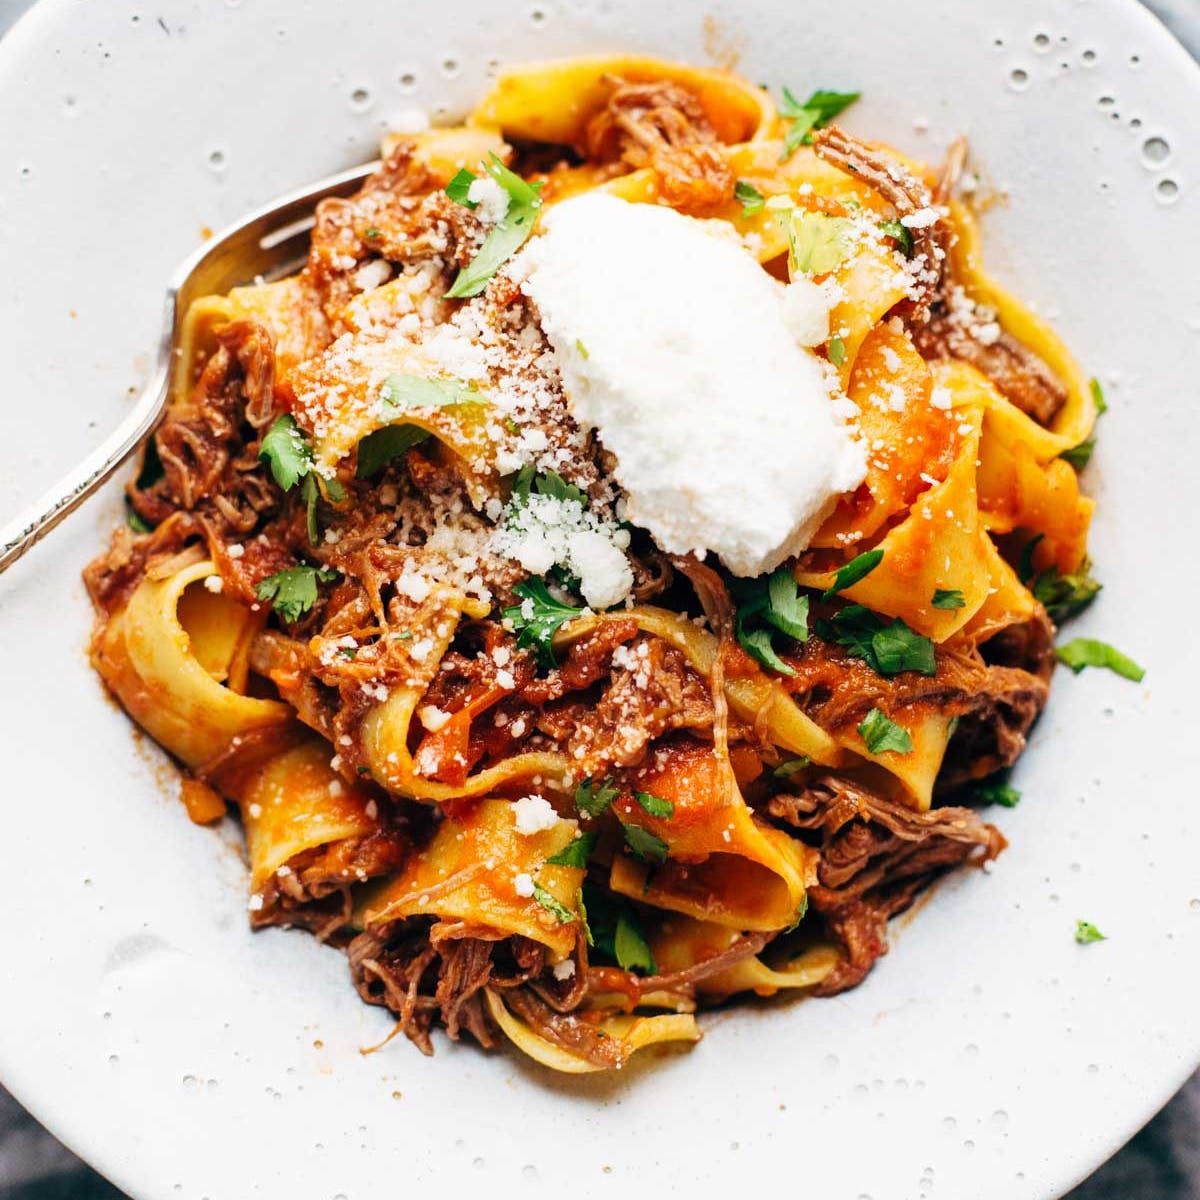 15 Slow-Cooker Beef Recipes That’ll Impress at the Dinner Table